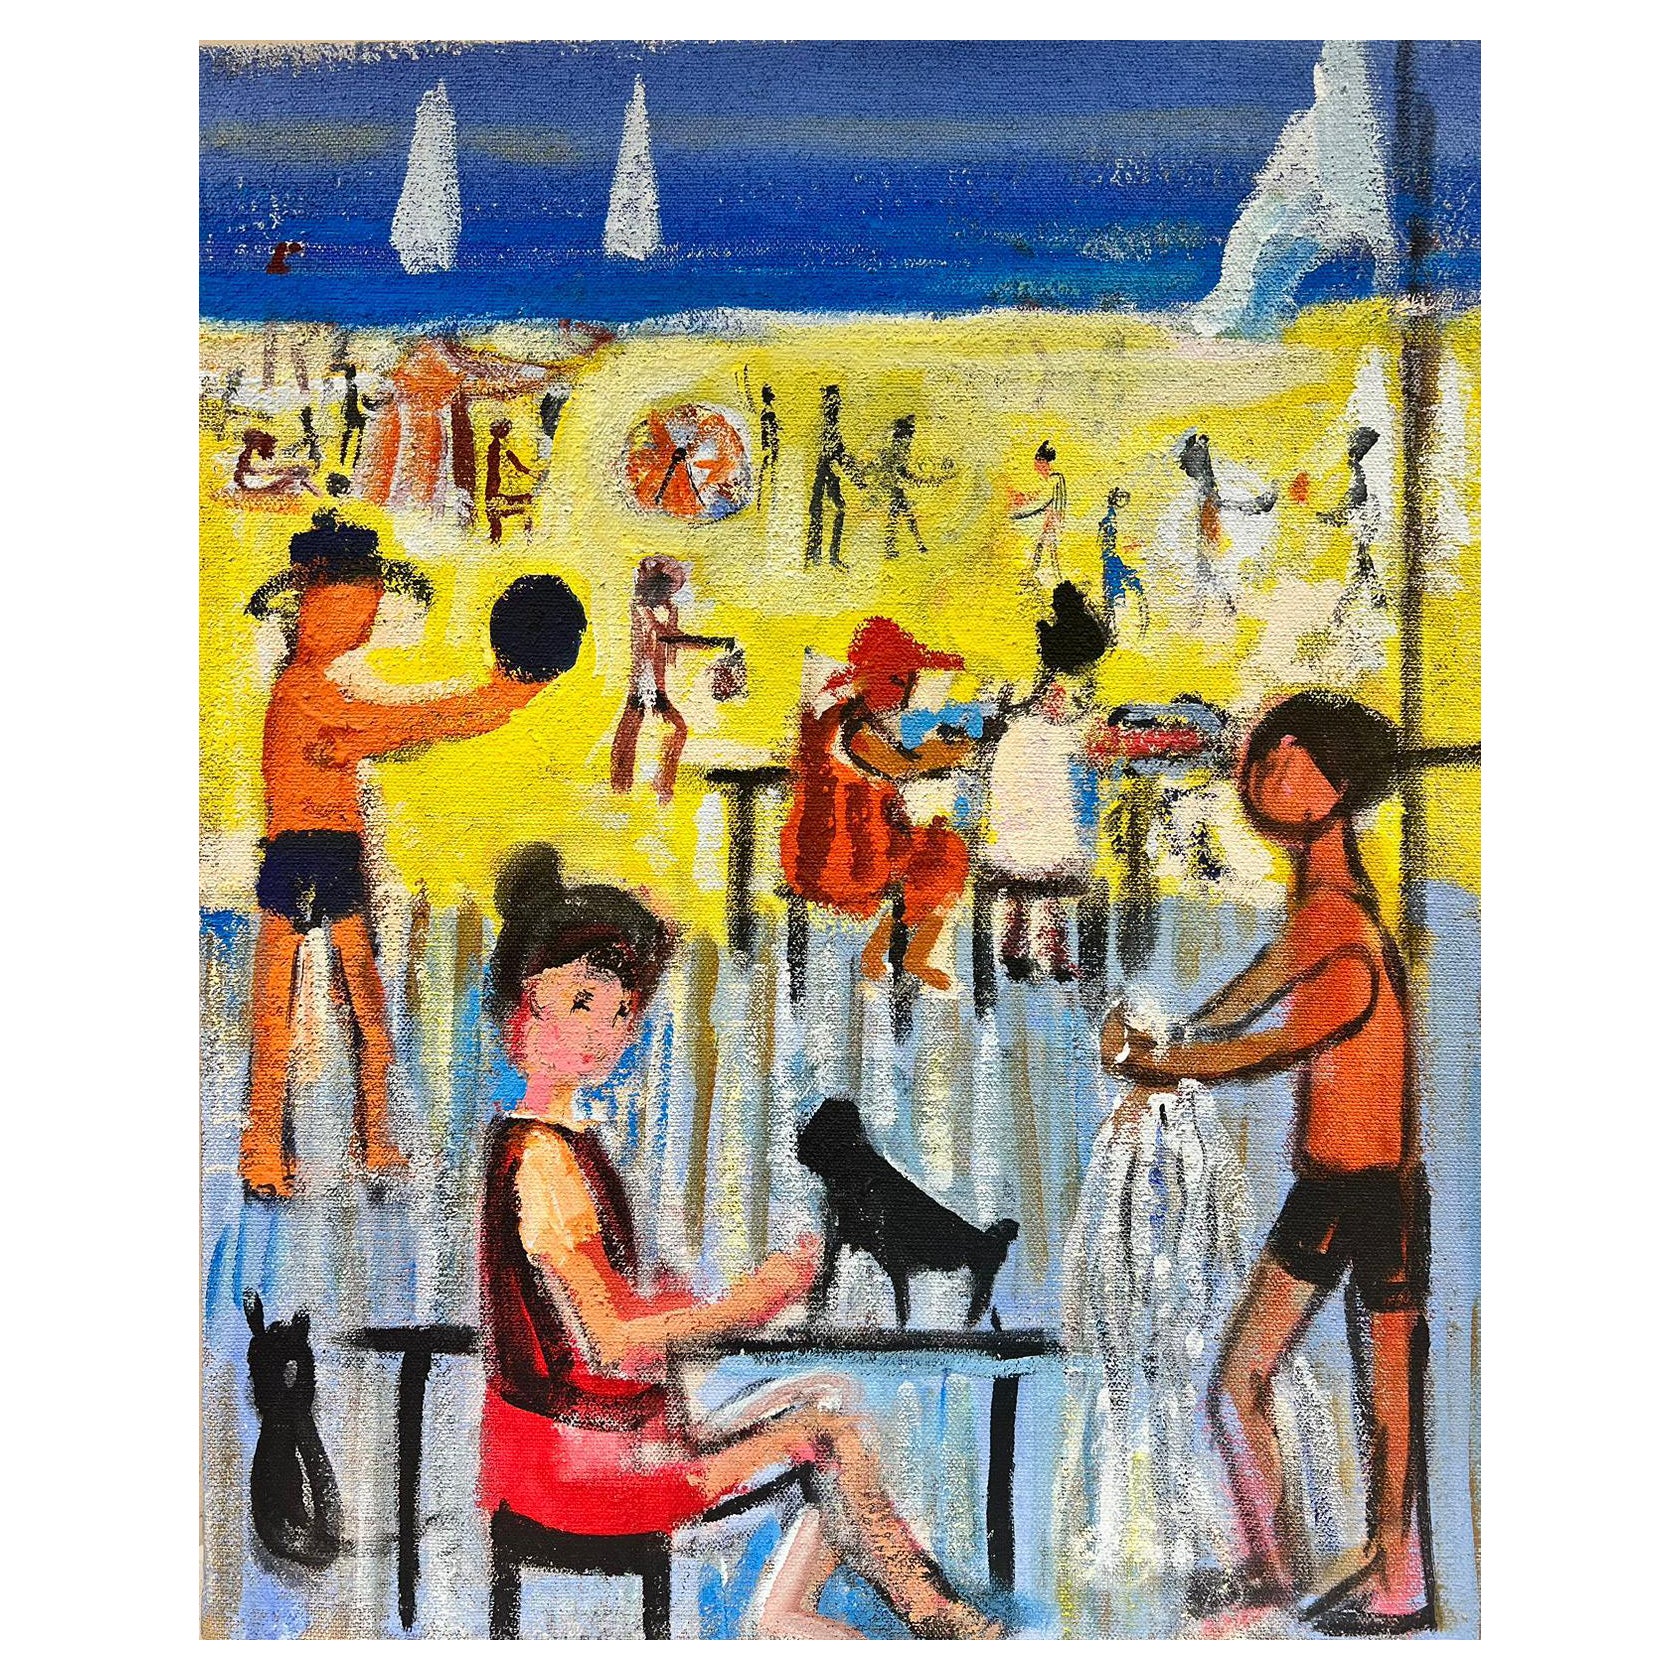 Large French Contemporary Modernist Oil Painting Figures Playing on Sunny Beach